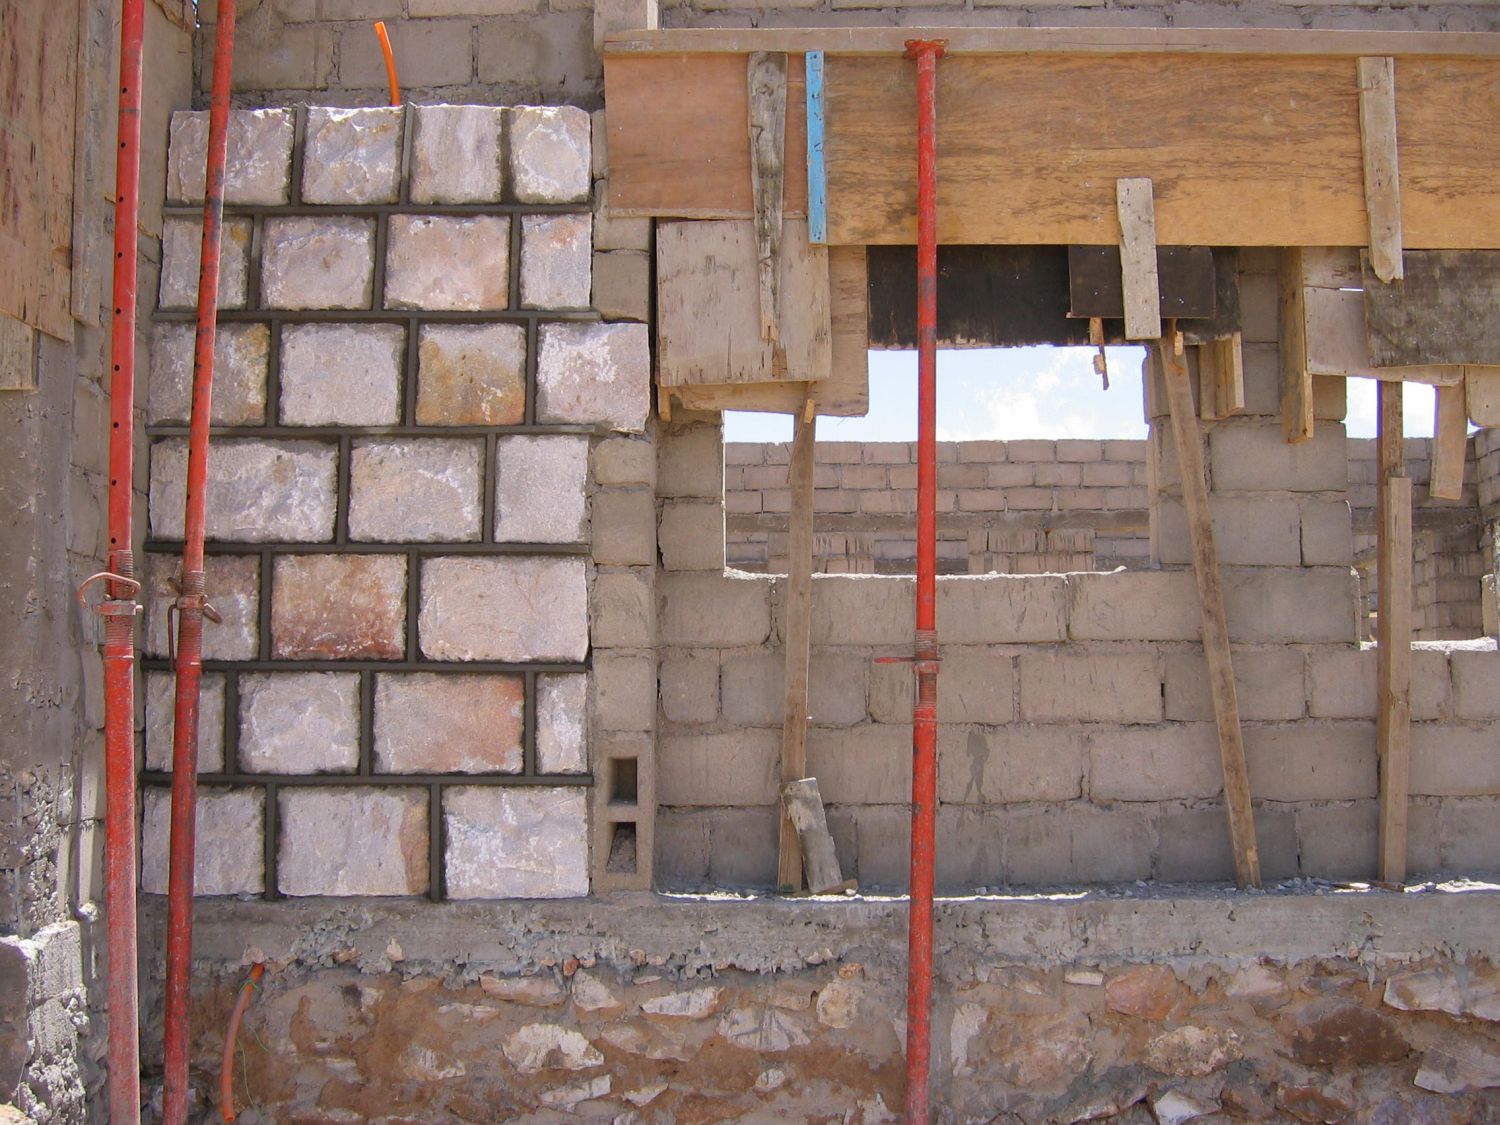 View of a wall under construction.  Cinder blocks were formed on site.